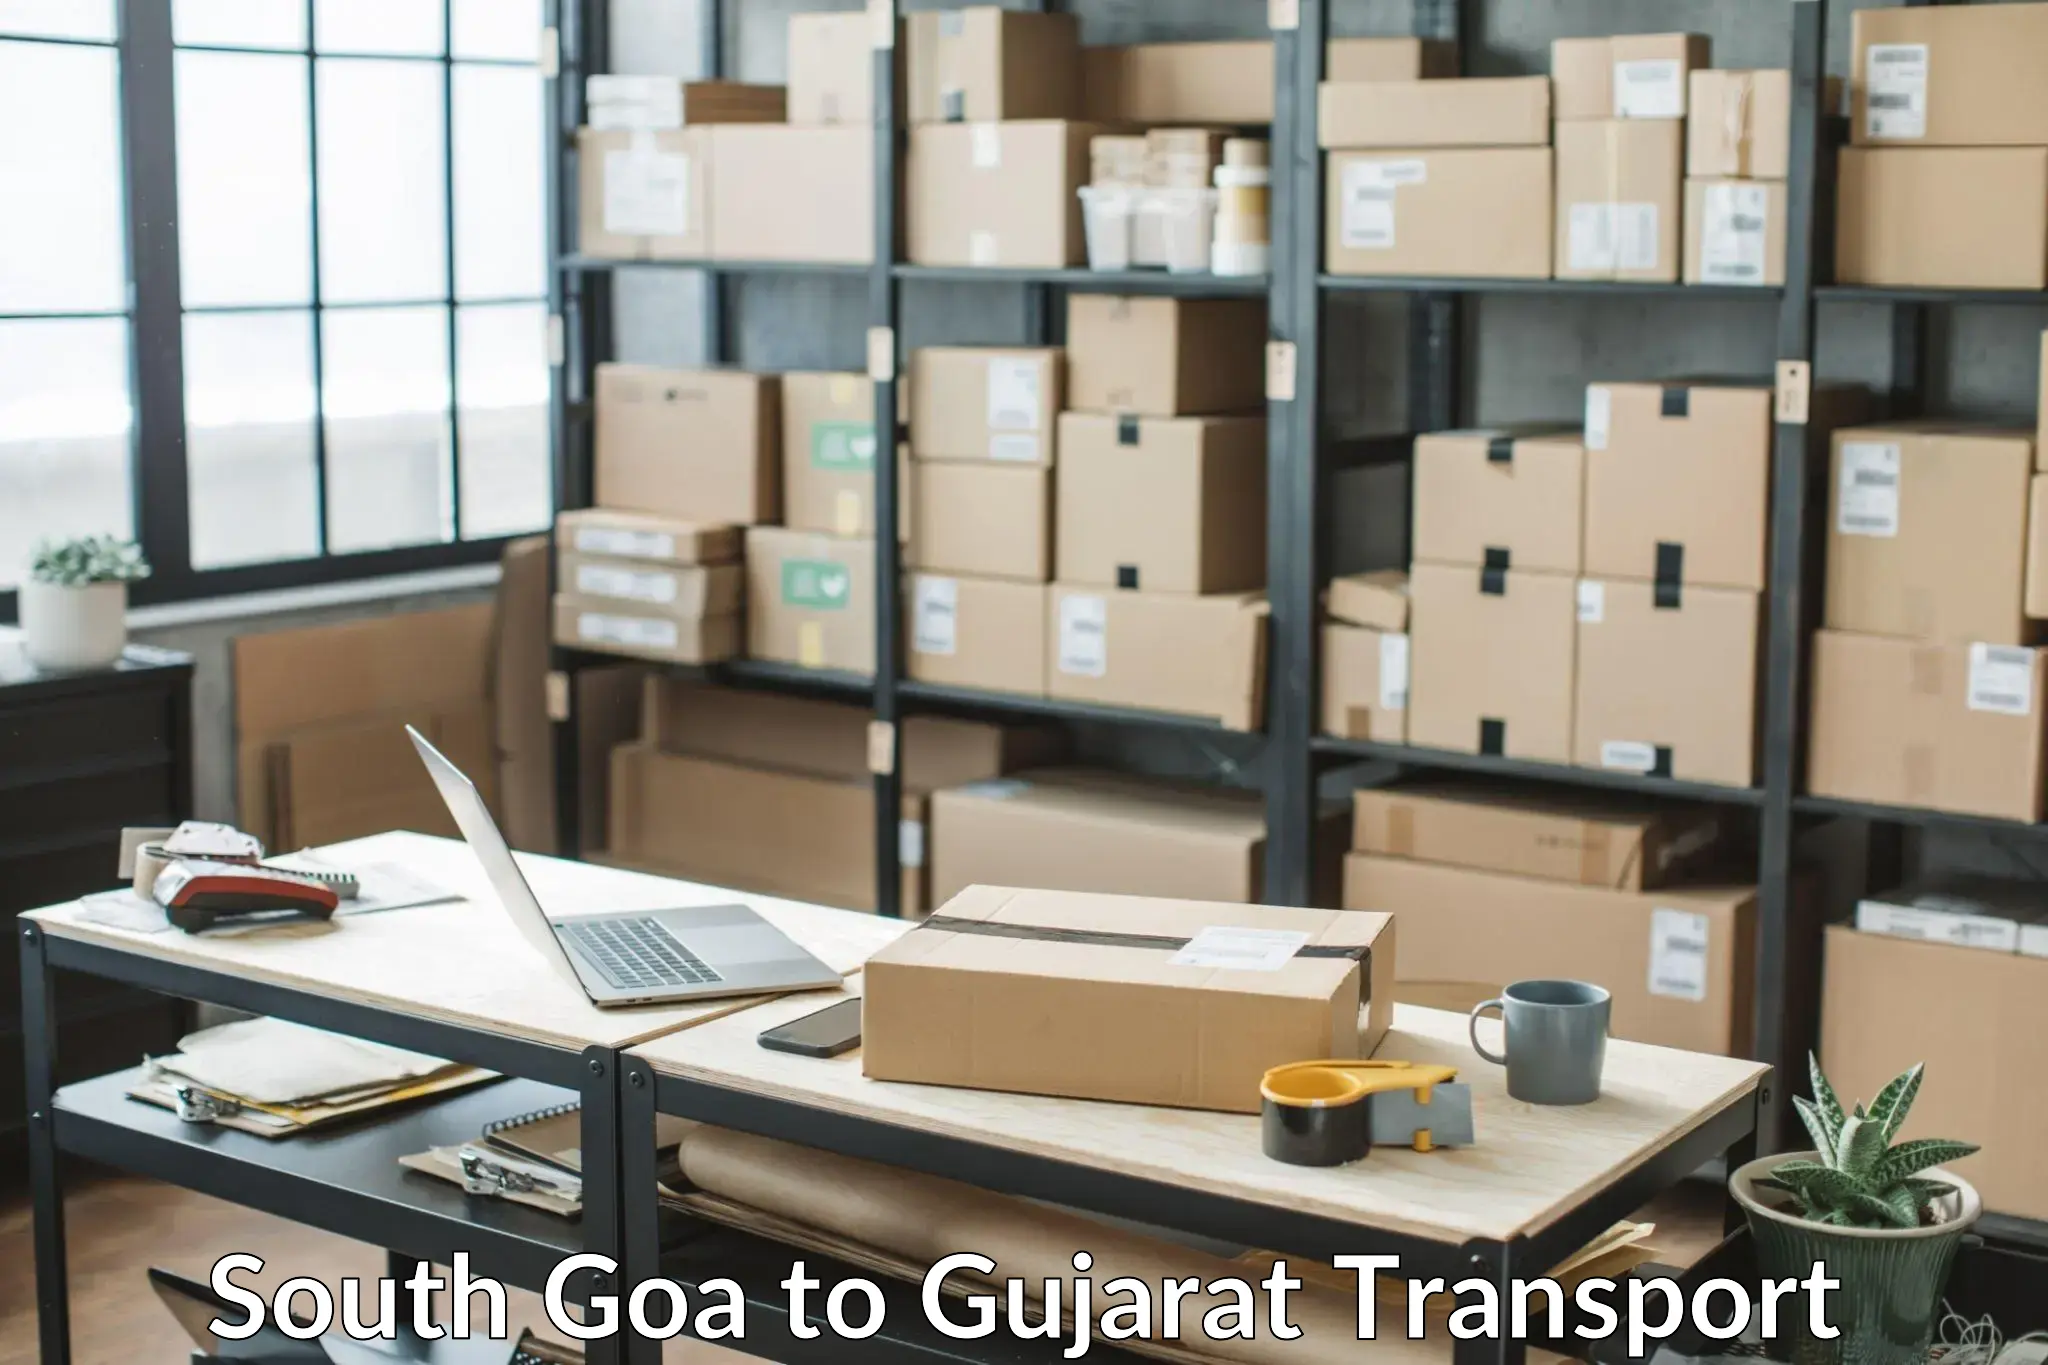 Container transport service South Goa to Kalol